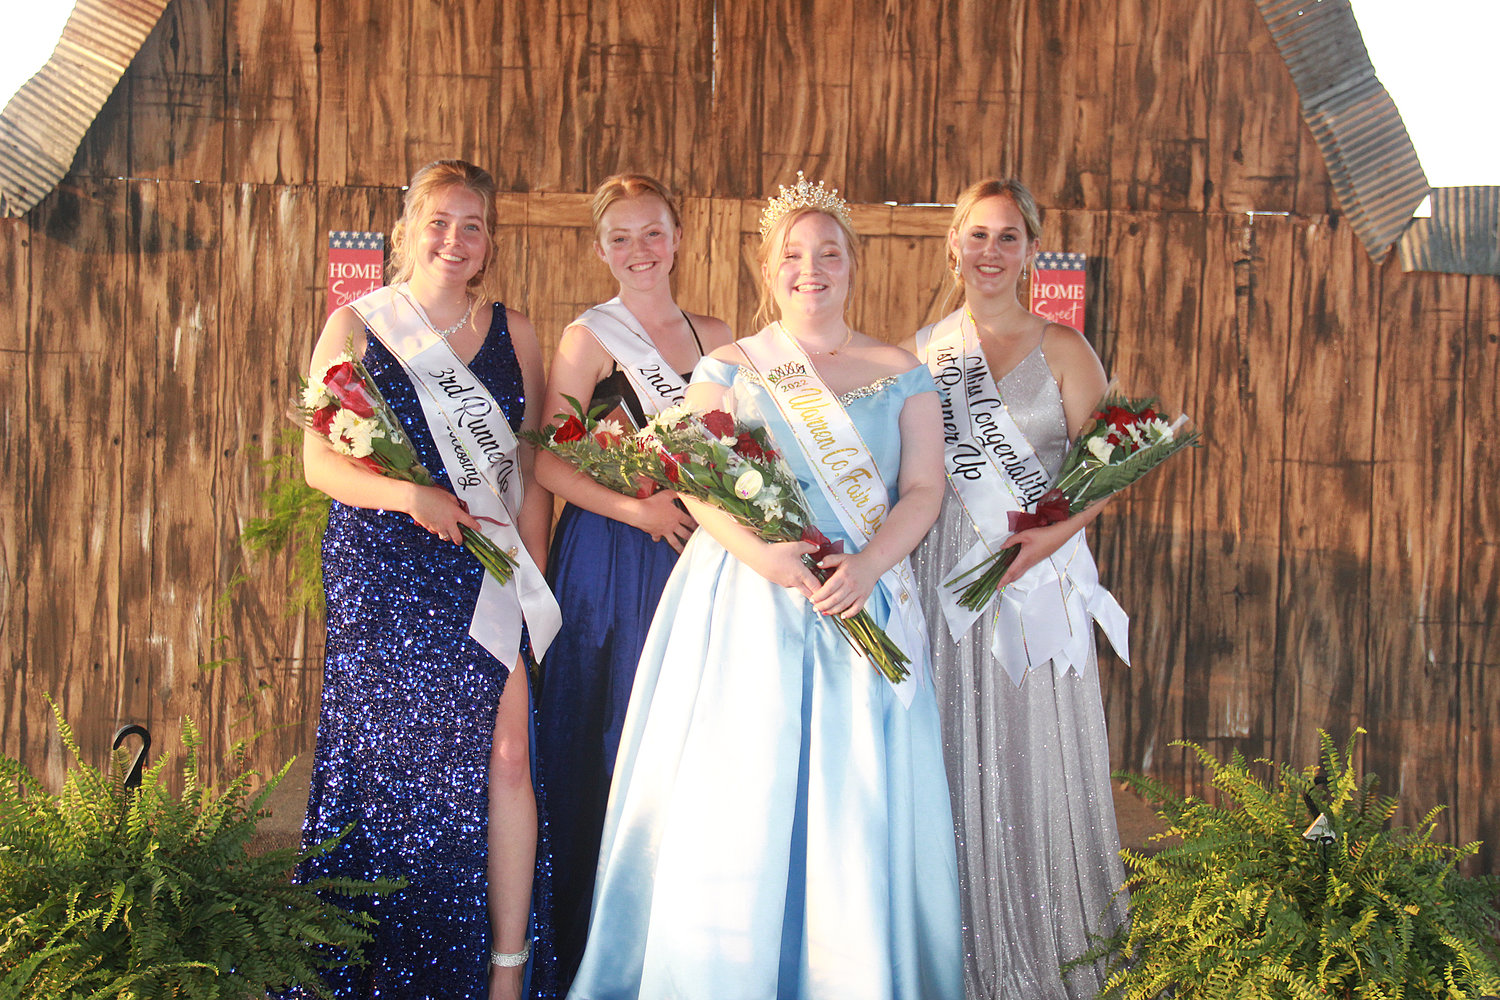 QUEEN’S COURT — A new fair queen and court were coronated Sunday night at the start of the Warren County Fair. Payton Duncan, pictured in front, was named queen. With her, from left, are third runner-up Kelsey Miller, second runner-up Allison Duncan, and first runner-up/Miss Congeniality Britney Gifford.